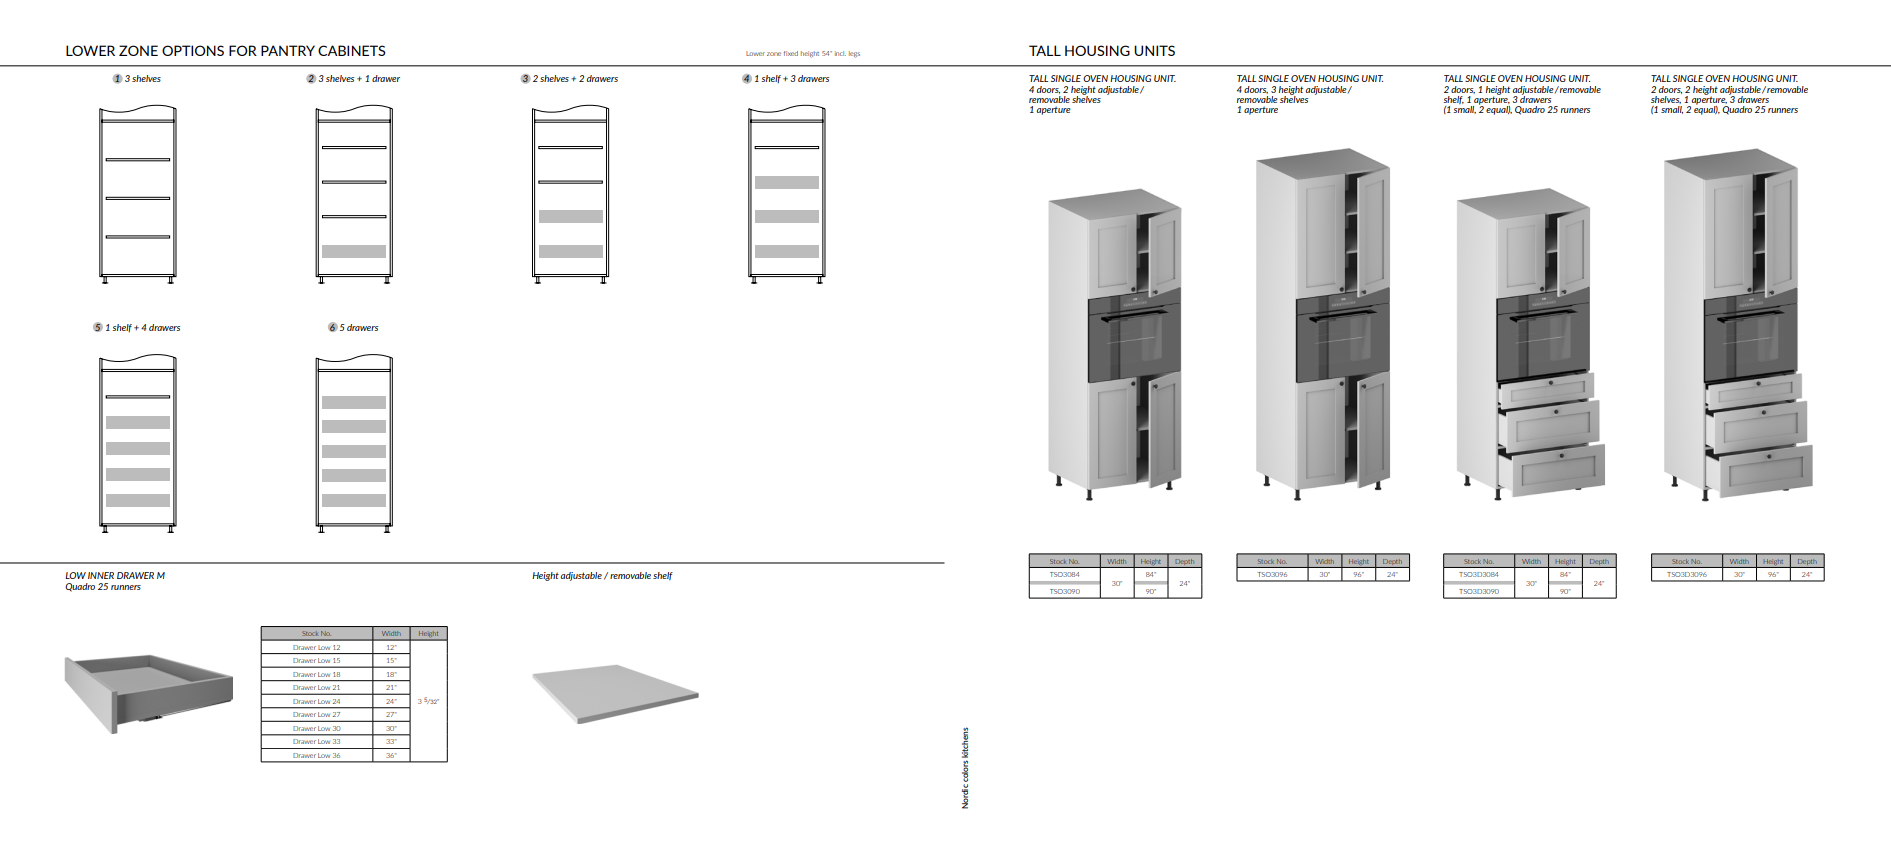 more details for cabinet options scheme: lower zones for pantry cabinets, tall housing units etc.